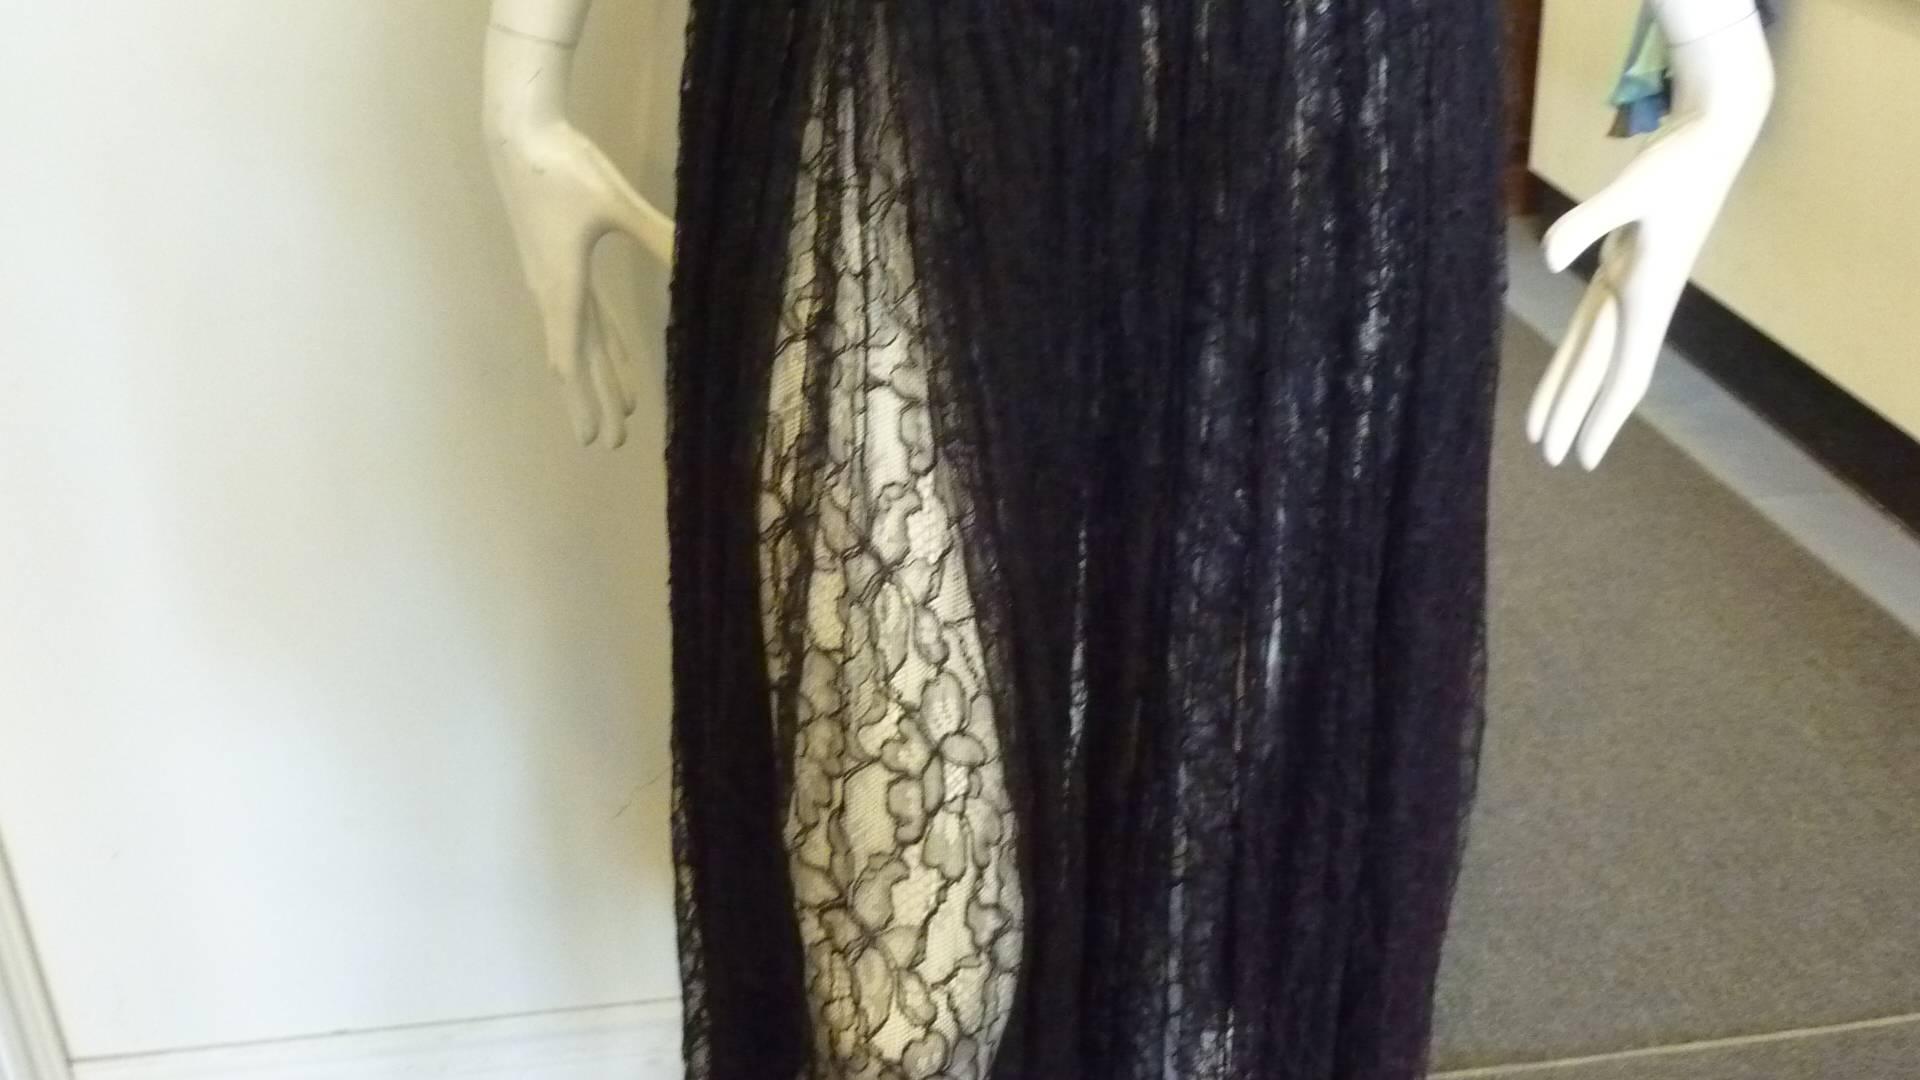 Wonderful mix of a black satin (rayon/cotton) top and lace (acetate/nylon) skirt with a red tinge. 

With the spagetti straps; slight v, and peek-a-boo lace skirt, this dress is an ideal party dress.

Closure is by a back zipper.